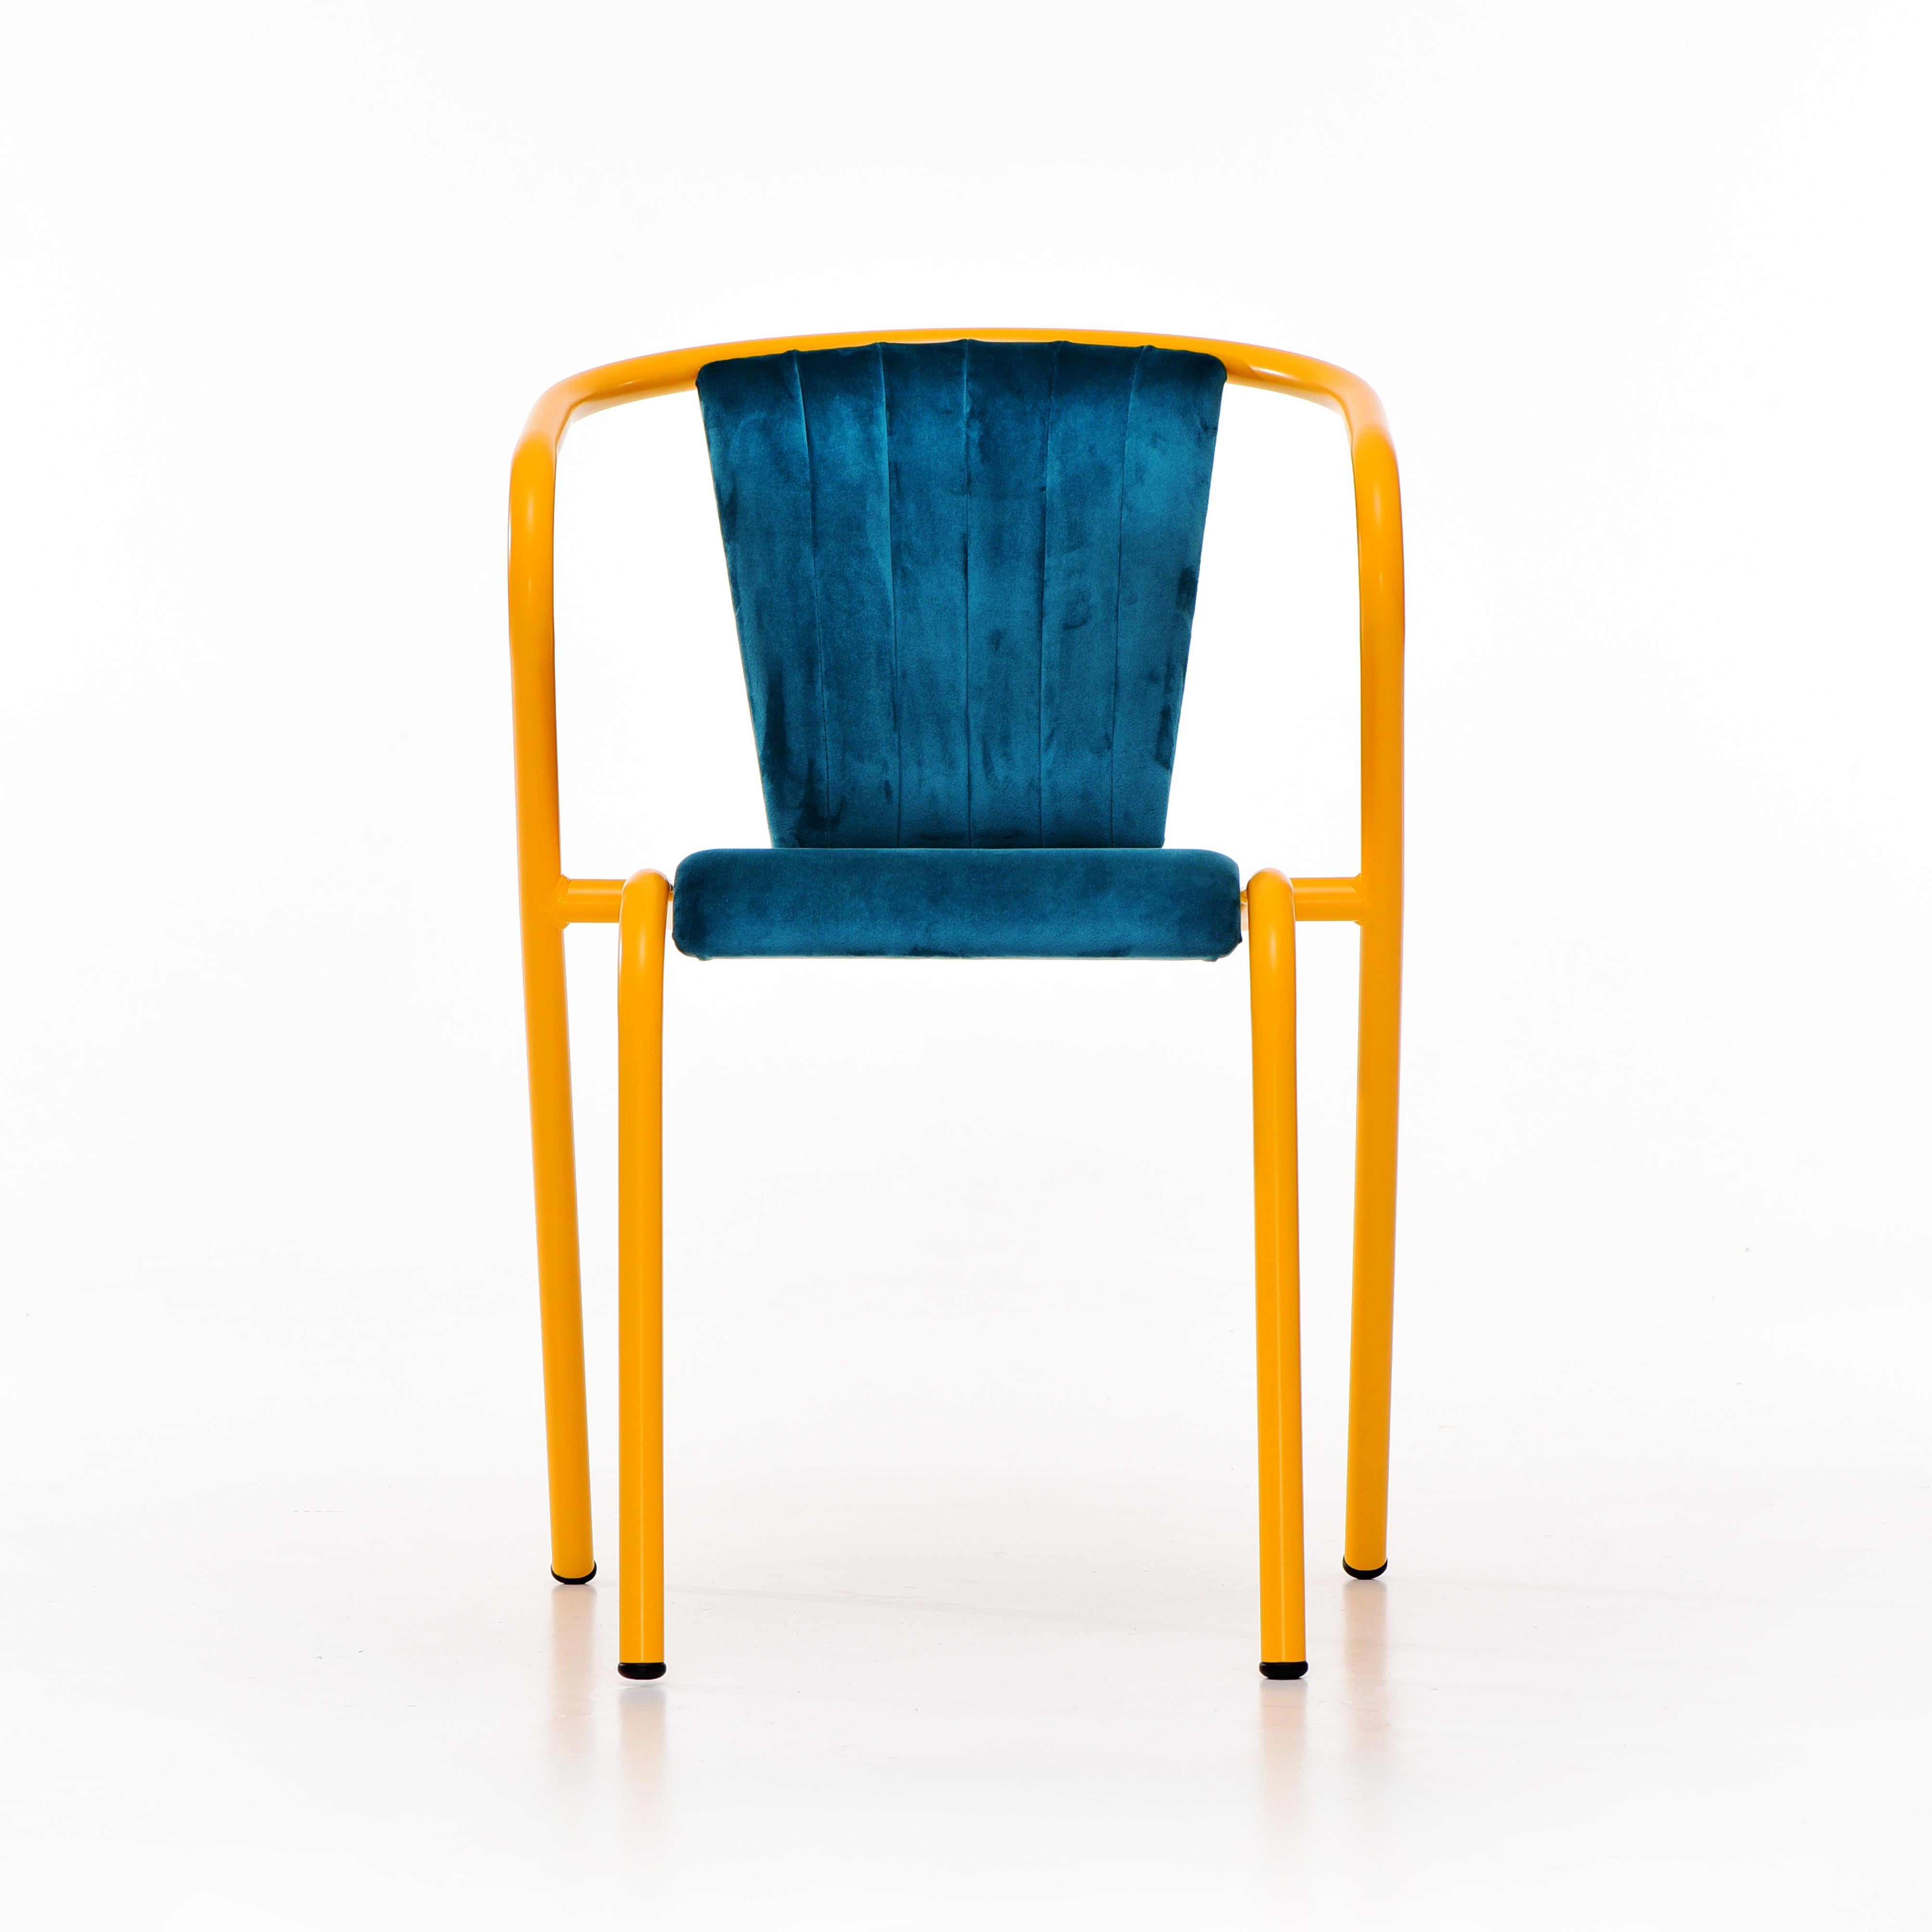 BICAchair is a stackable steel dining armchair made from recycled and recyclable steel, finished with our premium selection of powder-coating colors, in this case in a bright yellow color, that transforms a Classic in something new and vibrant. The